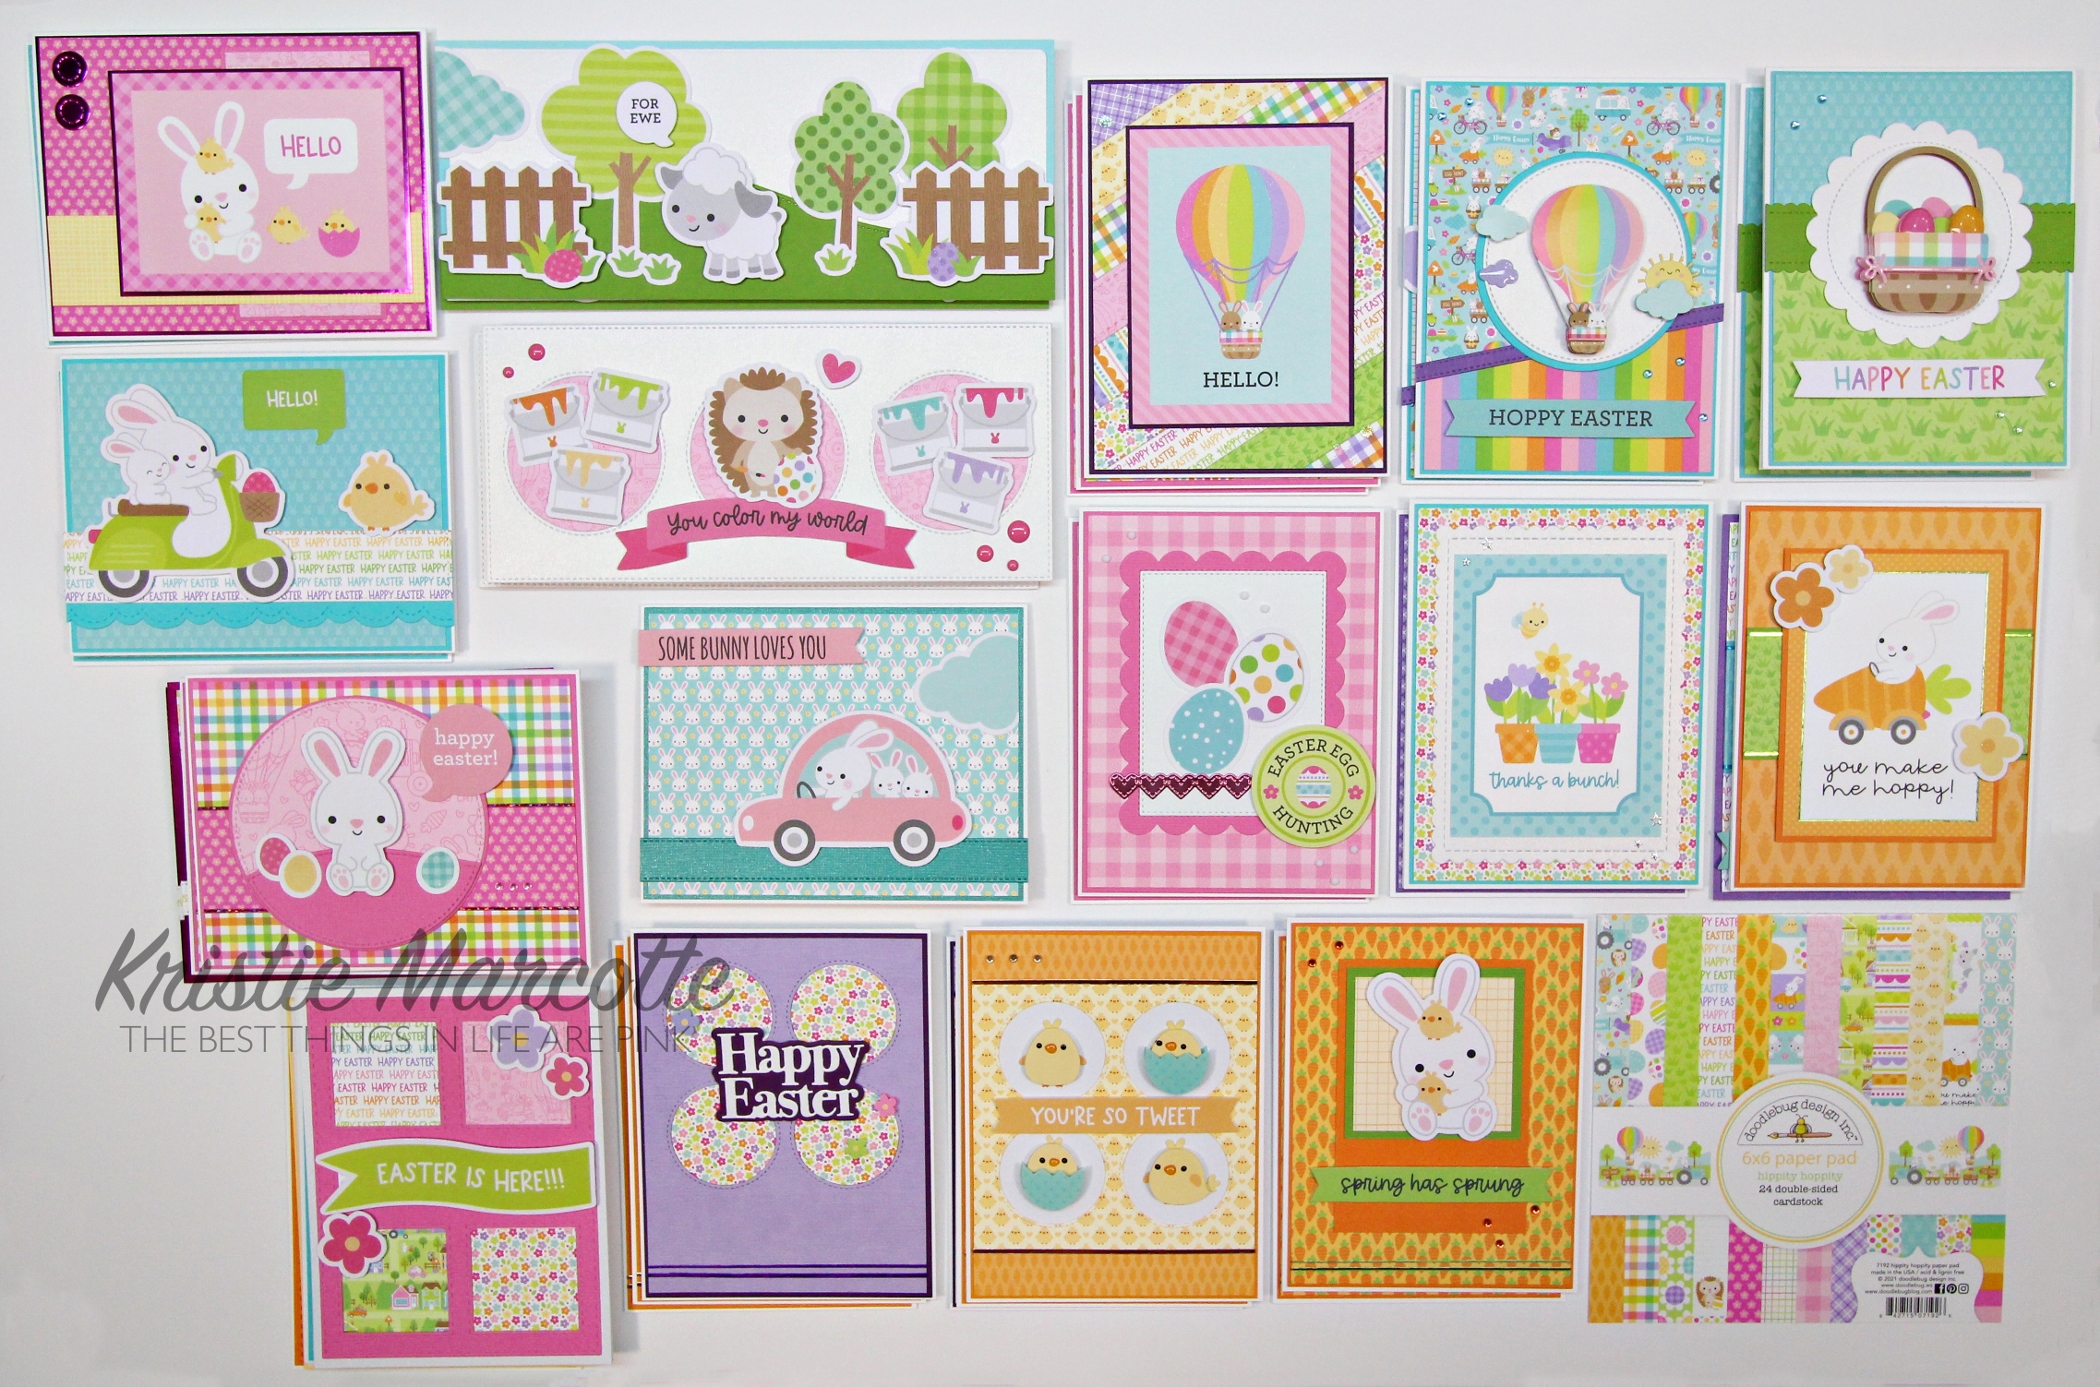 Doodlebug Design – Hippity Hoppity – 40 cards from one 6×6 paper pad